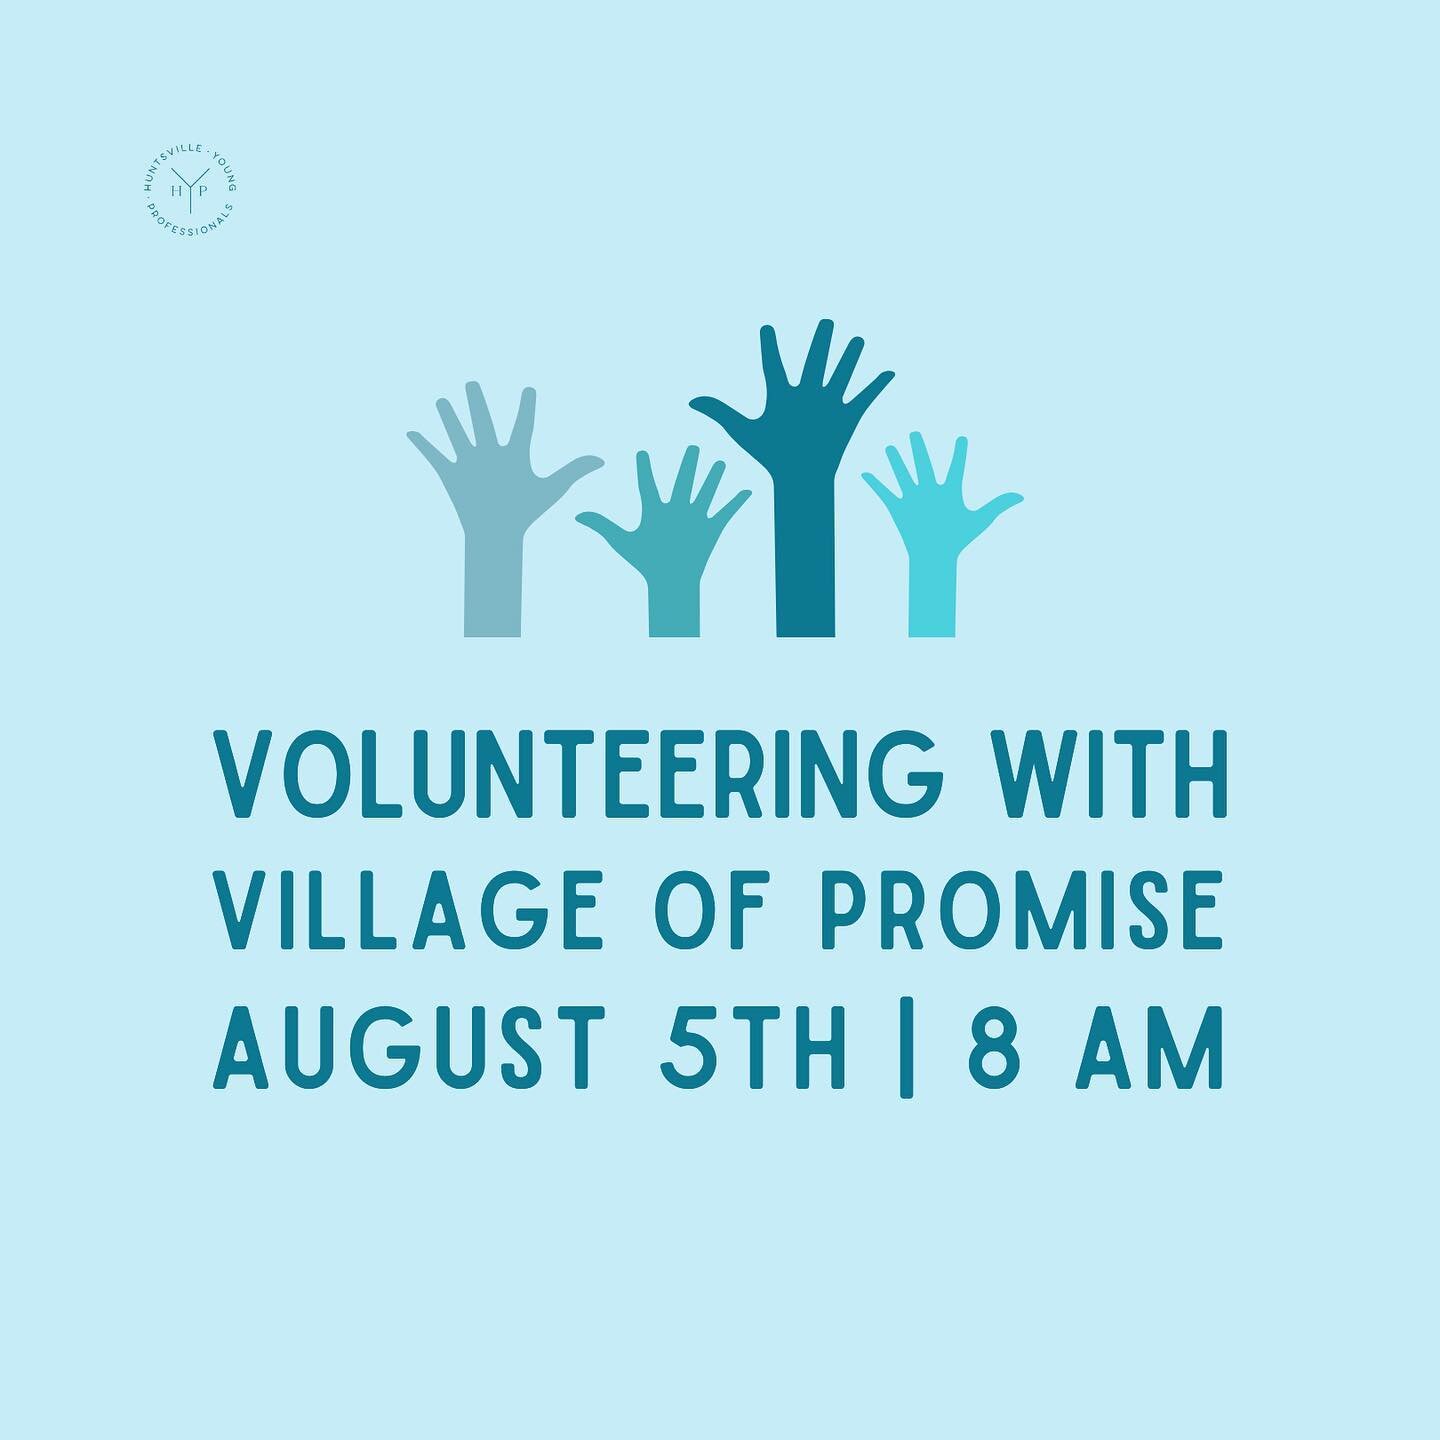 Please join Huntsville Young Professionals as we volunteer with Village of Promise for their monthly Serve Day.

We will meet at 8am at Village of Promise to work on the projects they have planned for us. We will most likely be working outside, so pl